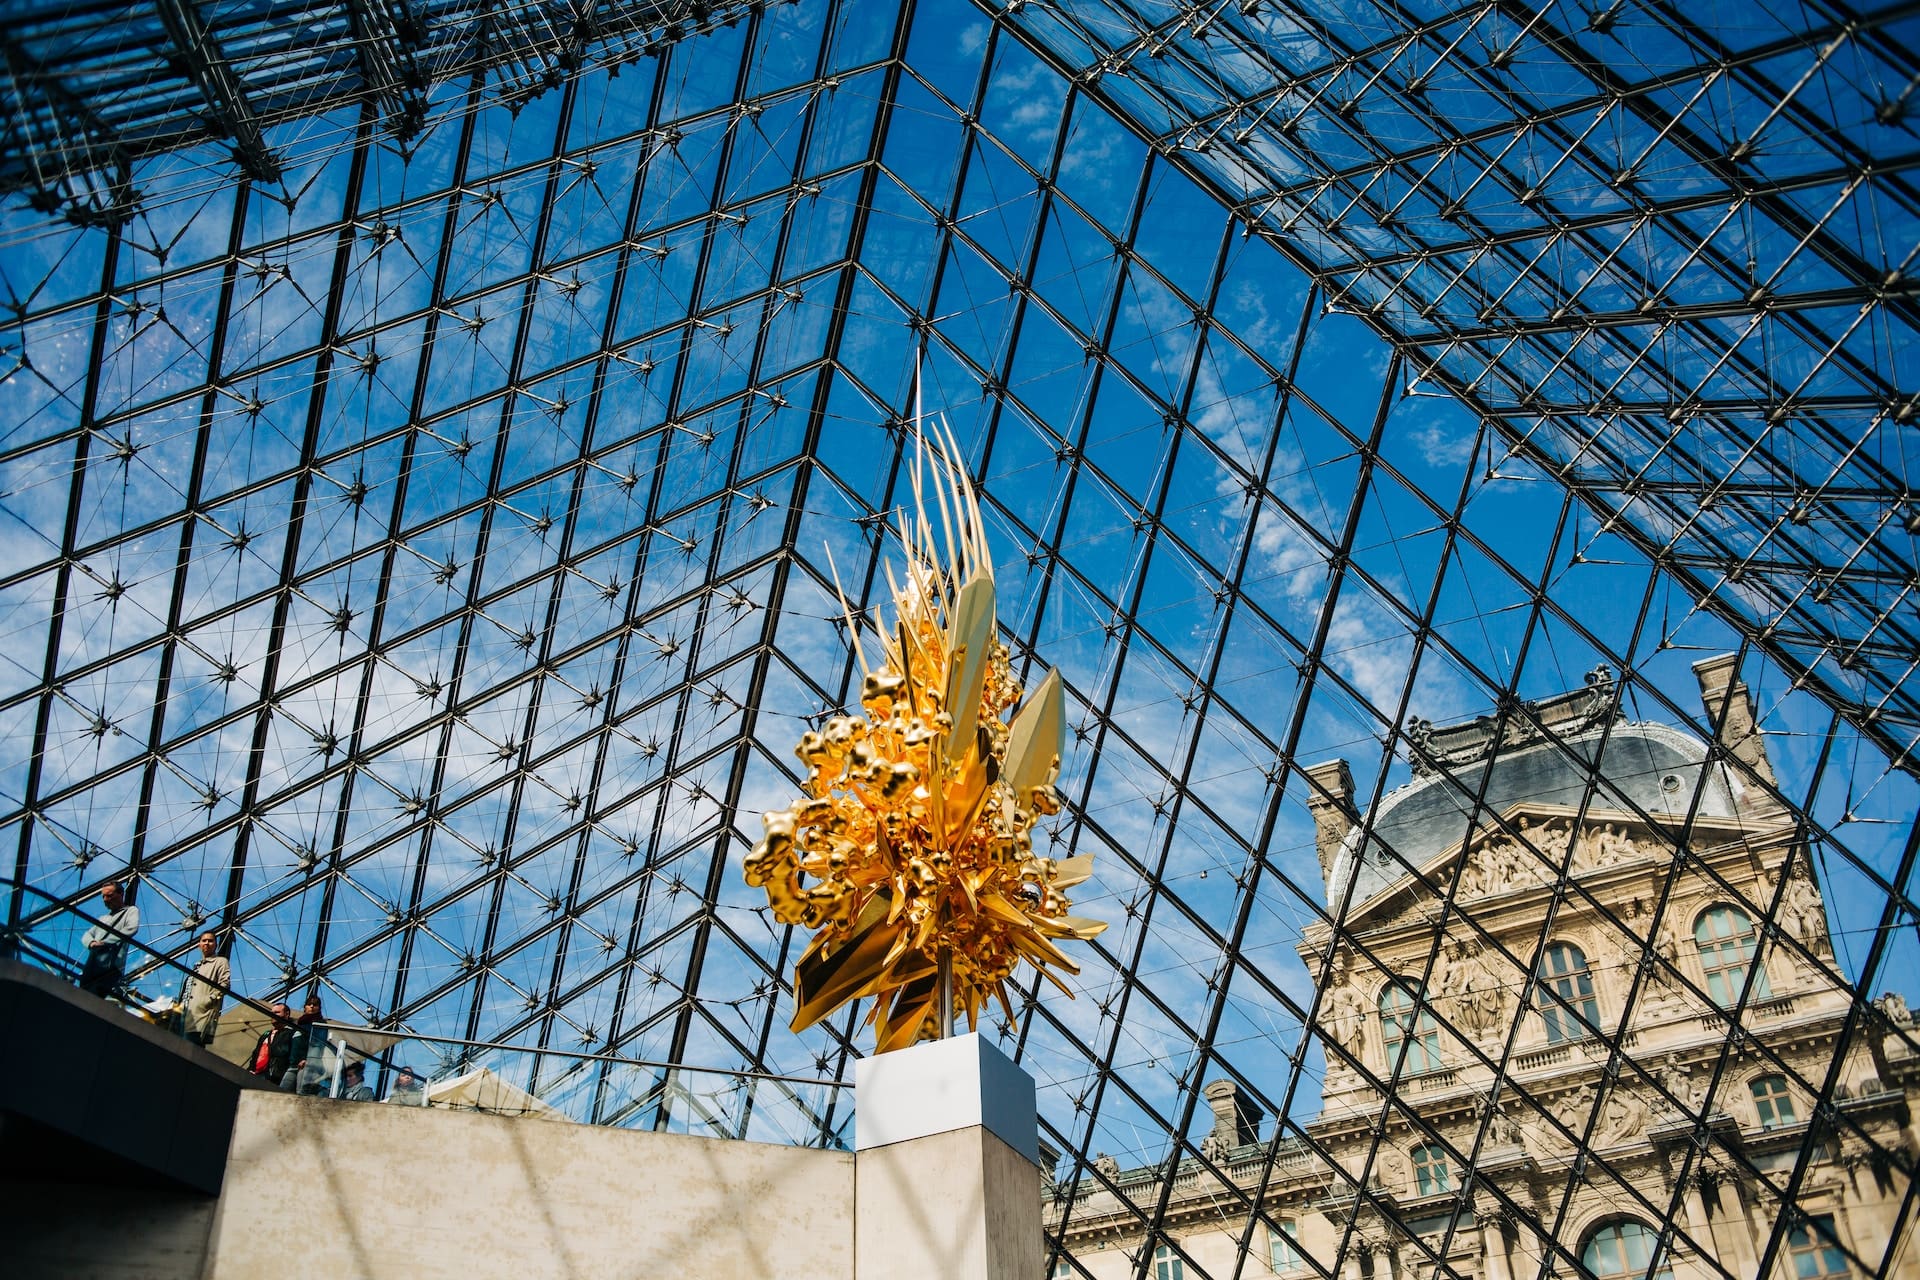 View from inside the Louvre's glass pyramid (photo: Jonathan Velasquez)